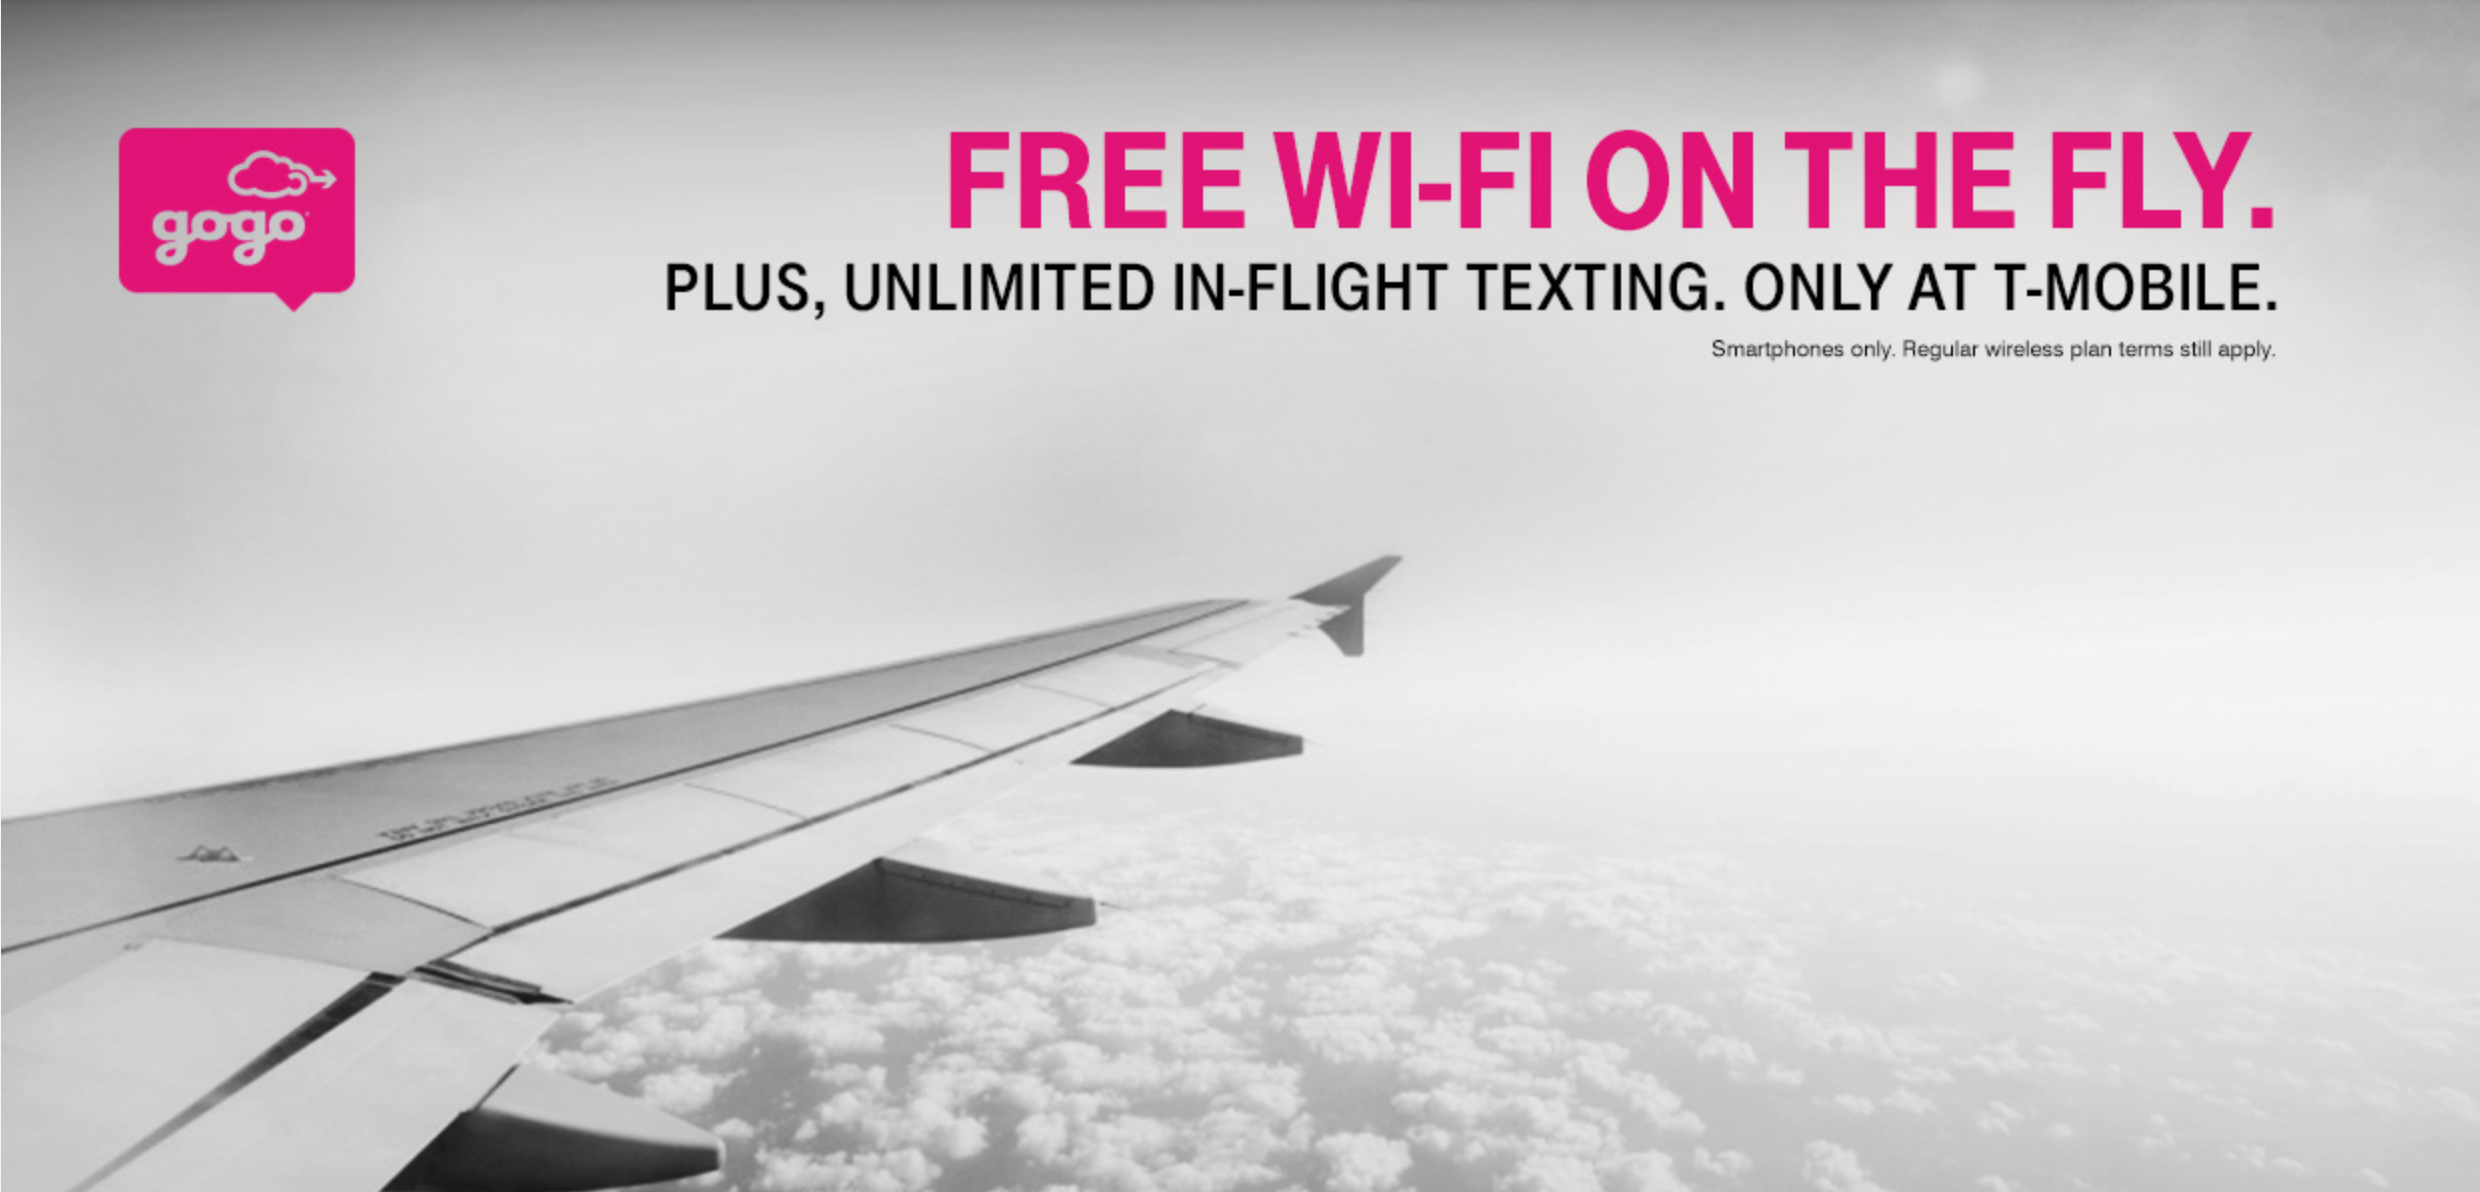 Médico confesar Personalmente Get Free Wi-Fi on Your Next Flight With T-Mobile - The Gate